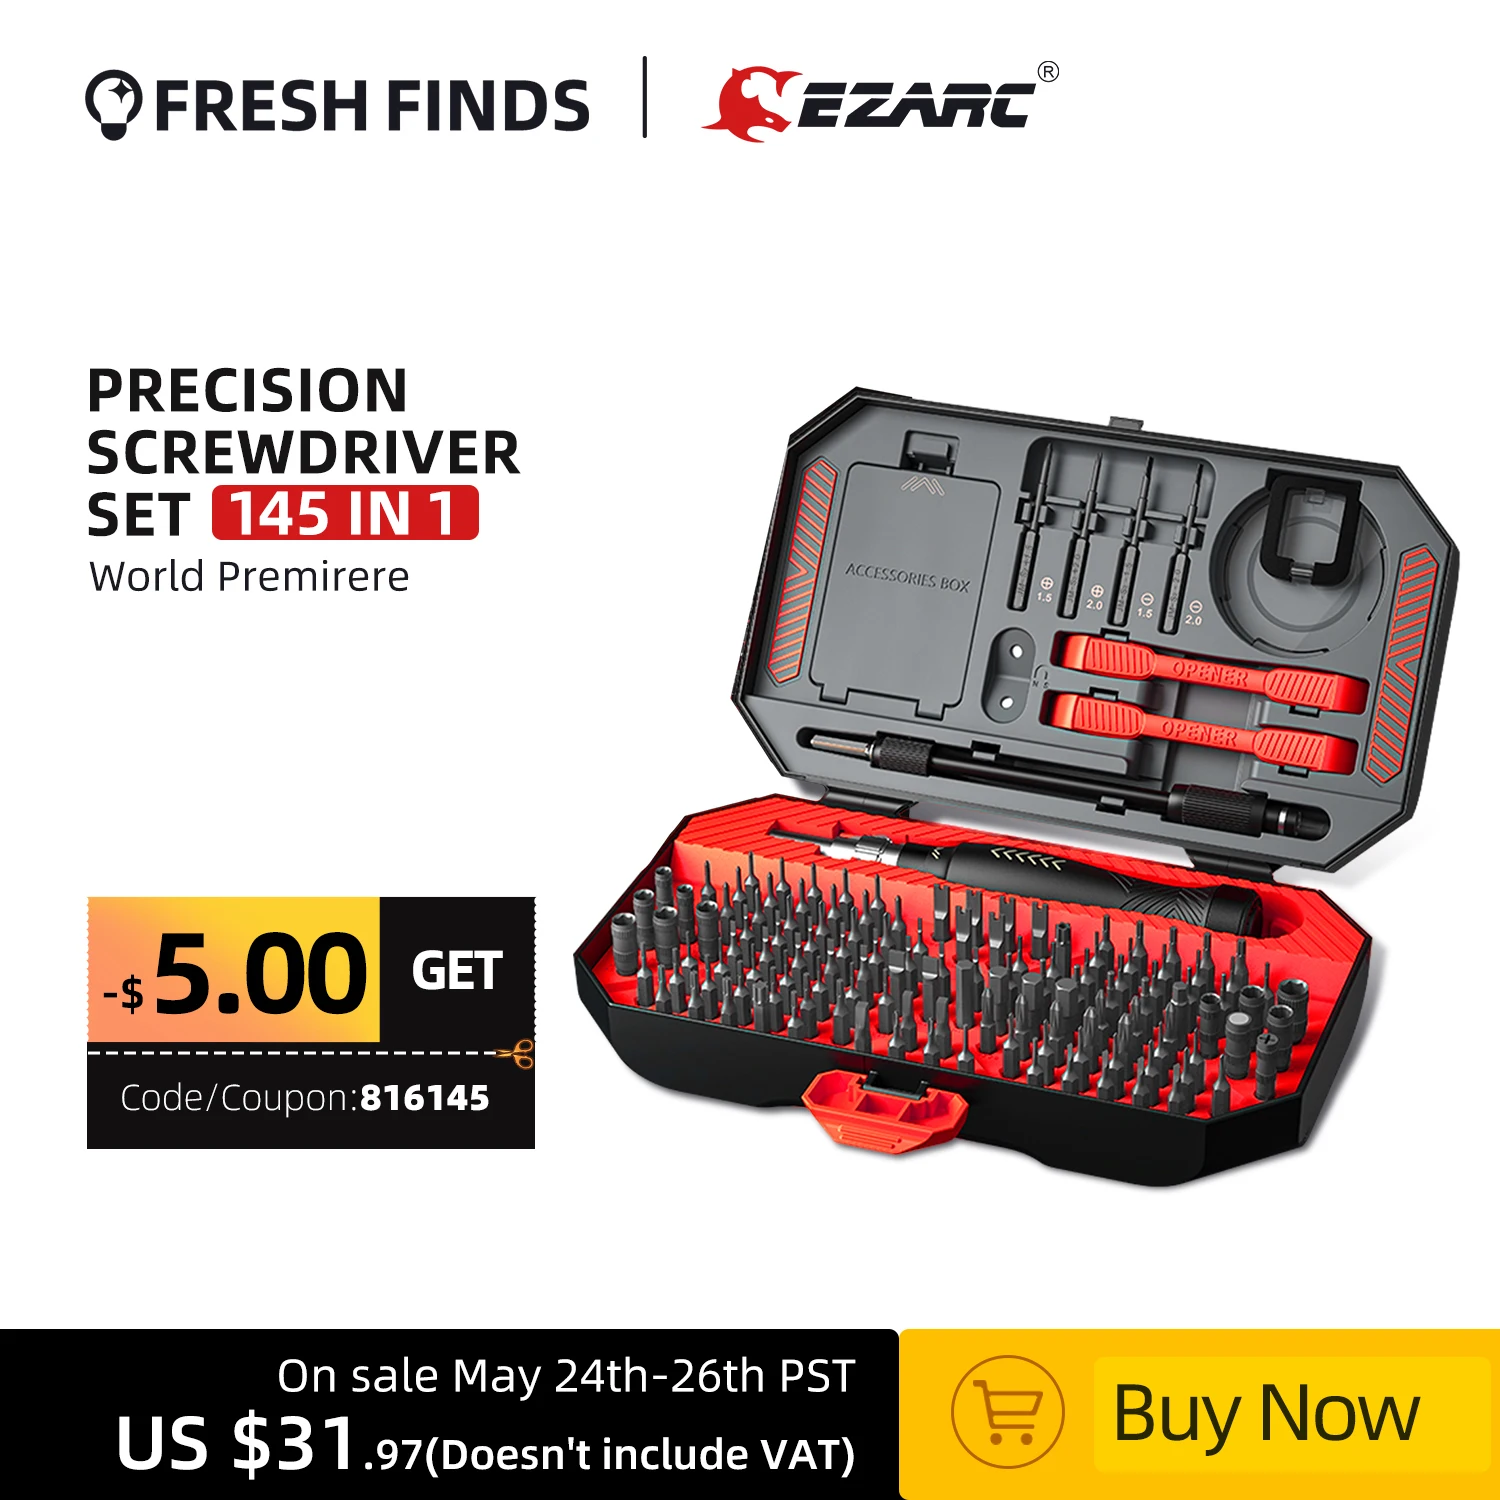 EZARC Precision Screwdriver Set 145 in 1 Magnetic Screwdriver Kit with Case Repair Tool for PC Laptop iPhone iPad Watch Glasses